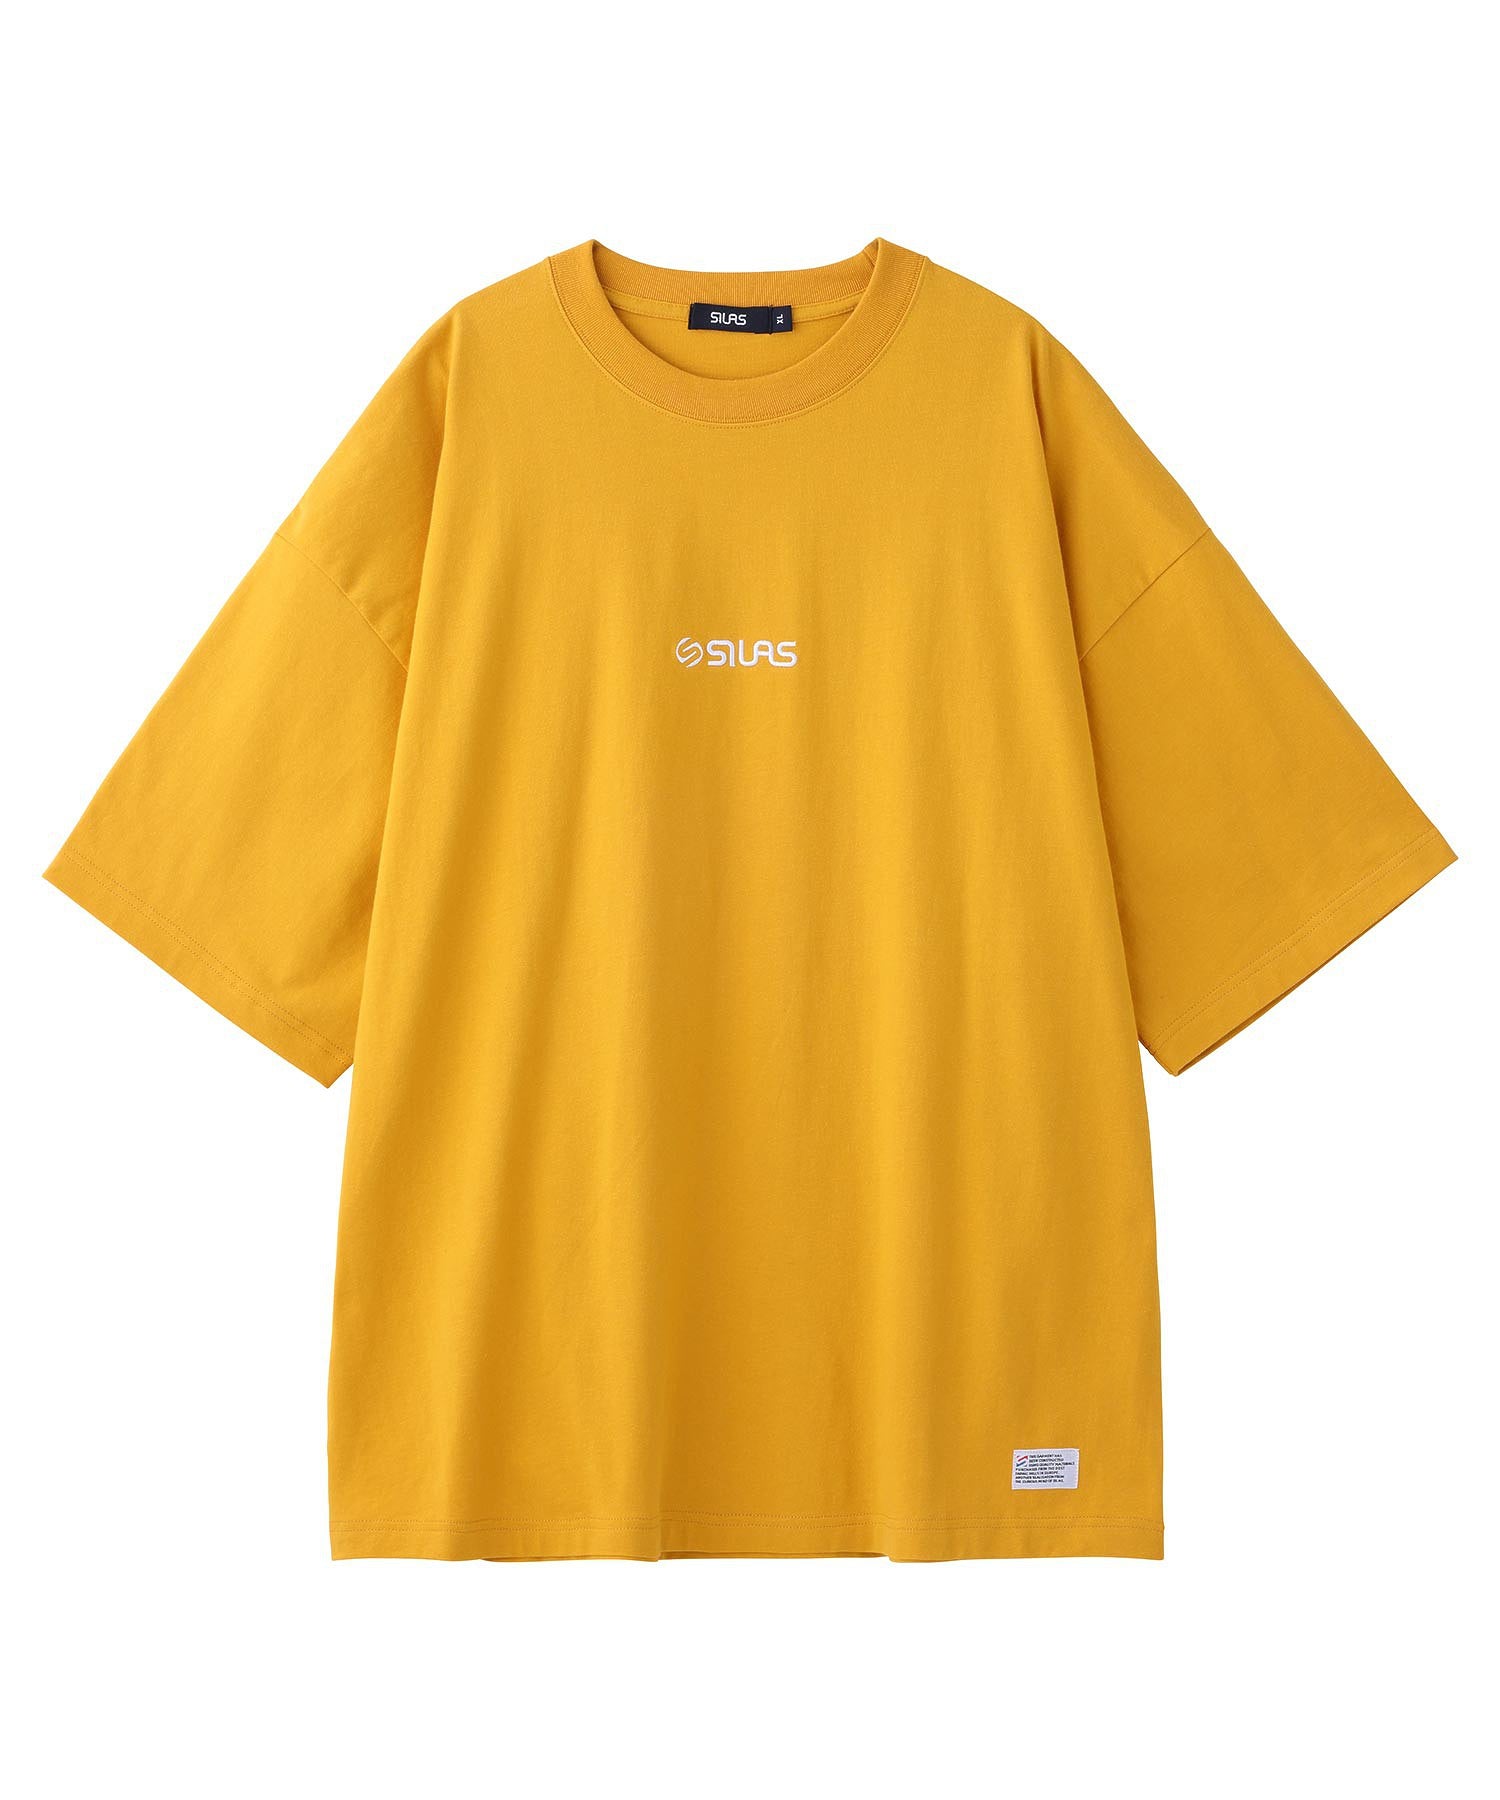 OLD LOGO EMBROIDERY WIDE S/S TEE SILAS